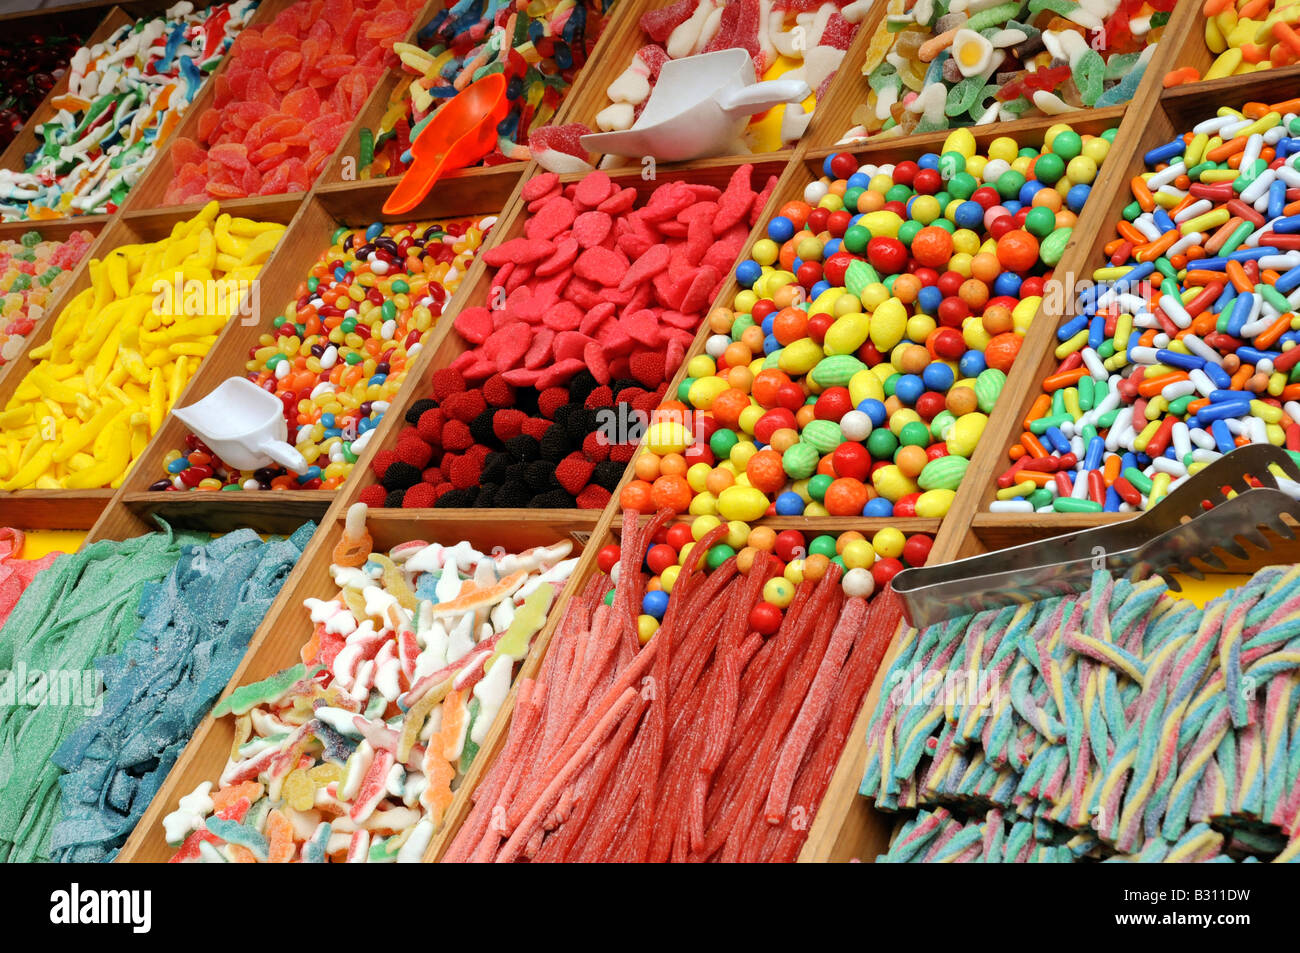 CANDY SWEET STALL Stockfoto